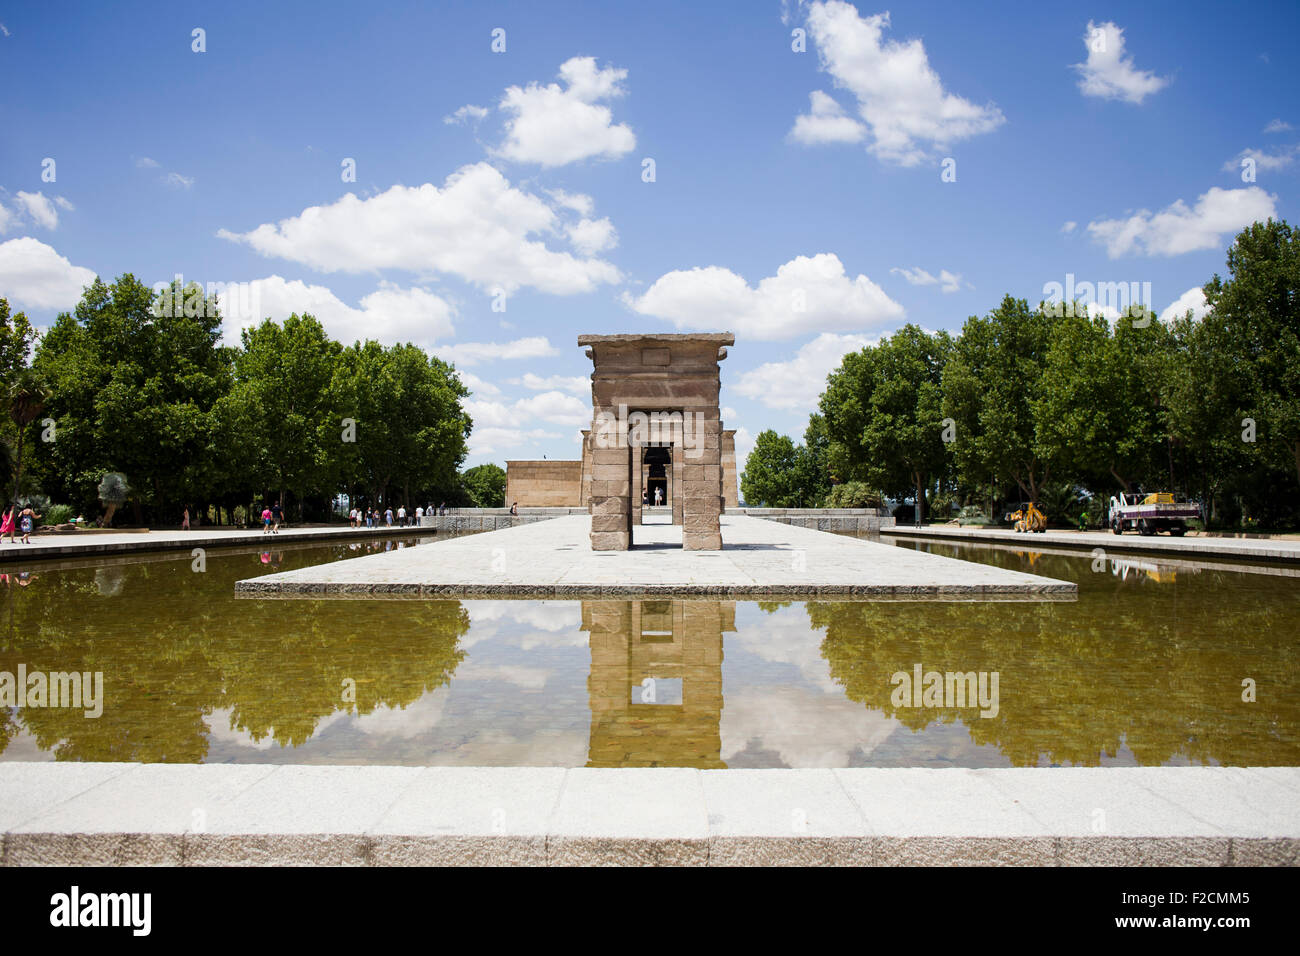 The Egyptian Temple of Debod is reflected in water on a sunny day in Madrid, Spain. Stock Photo